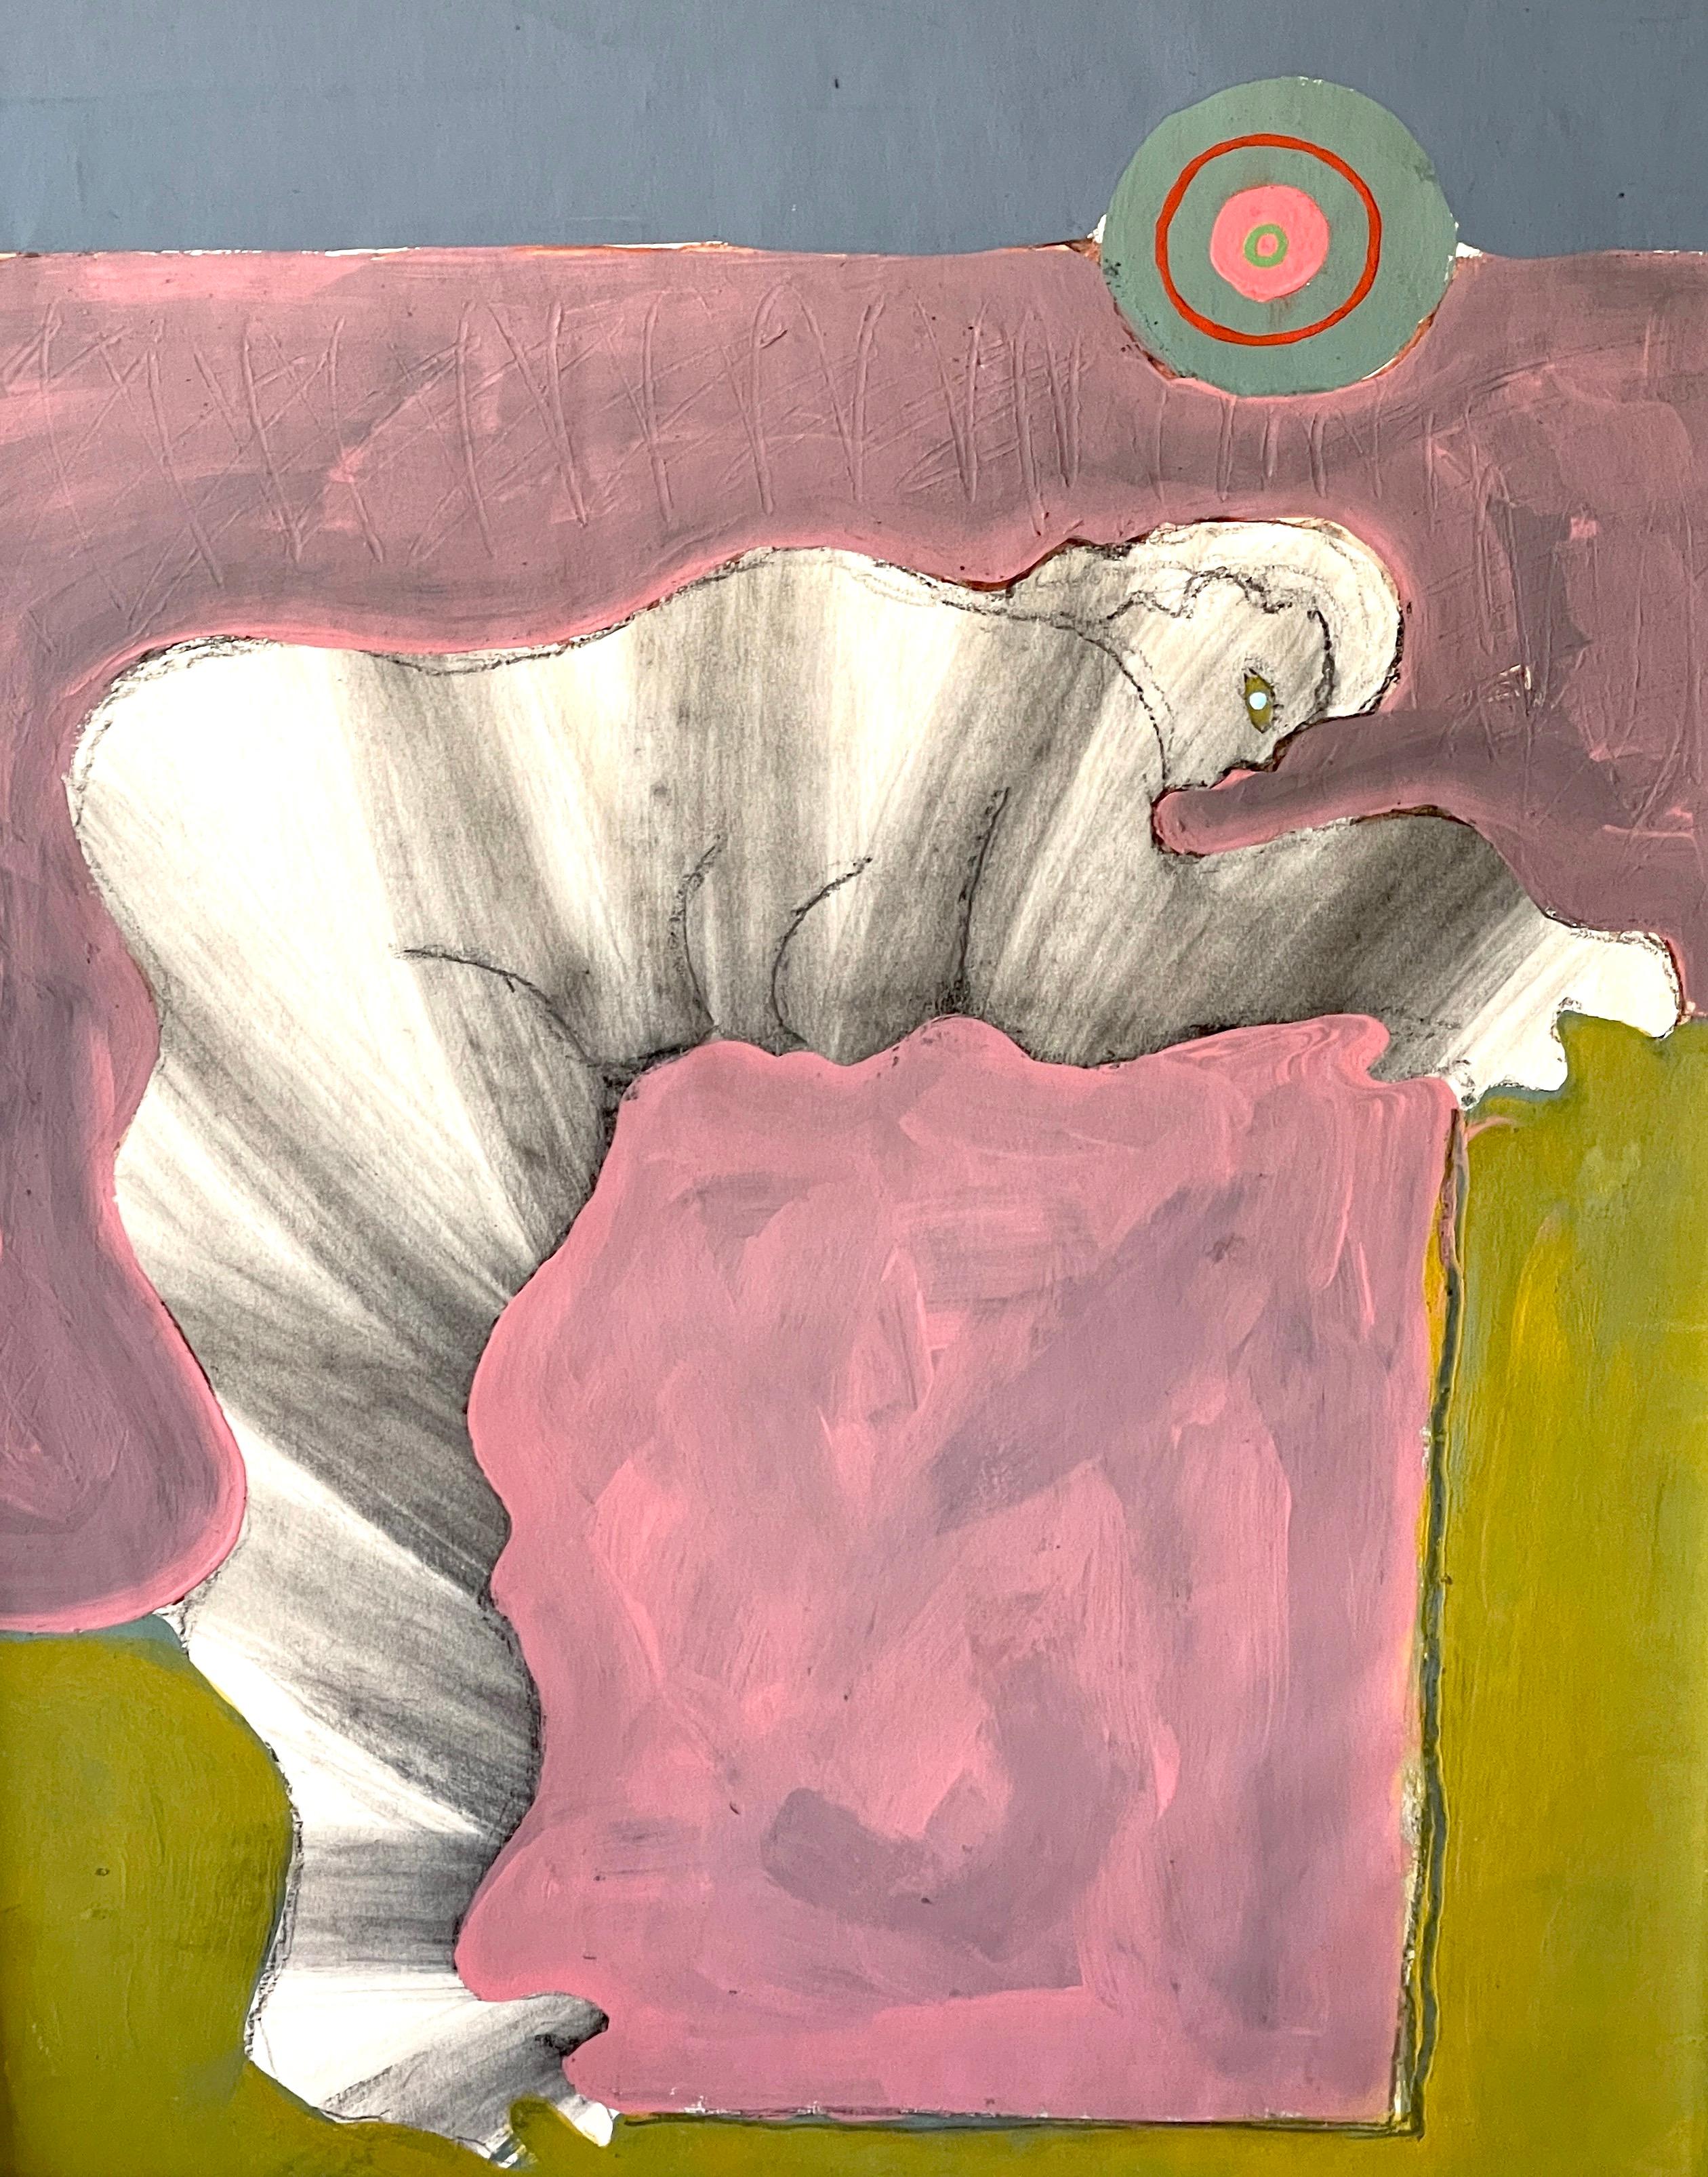 Mid-20th Century 'Study of Human Form' Oil/Mixed Media on Paper, 1960s by Douglas D. Peden For Sale